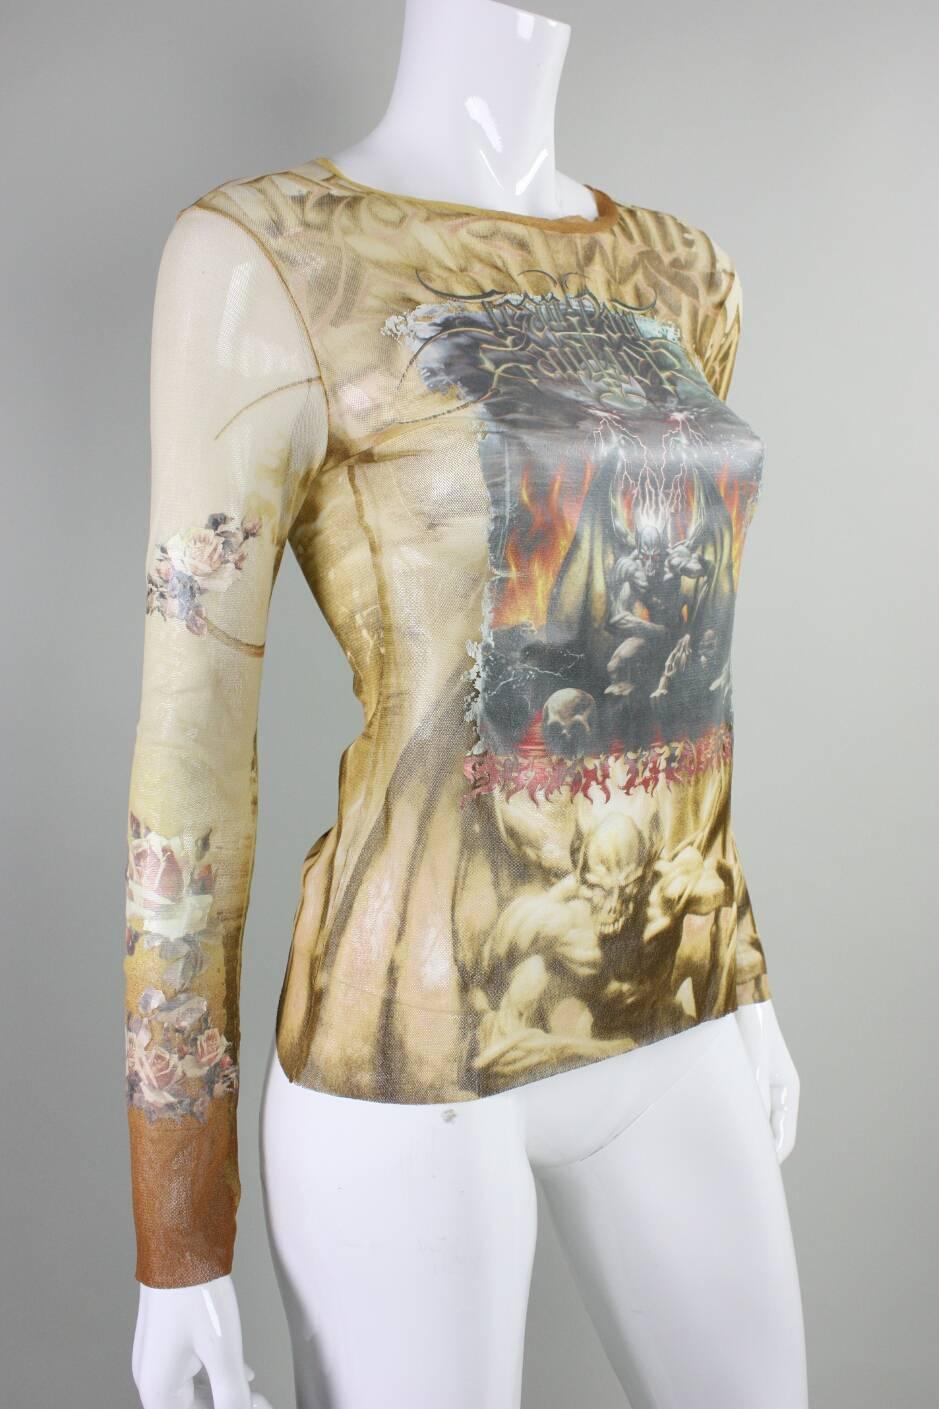 Jean-Paul Gaultier stretch mesh blouse with satanic motif likely dates to the 1990's through 2000's.  Sheer cream-colored netting is printed with demonic imagery and features what appears to be an iron-on transfer at the center front.  Unlined.  No